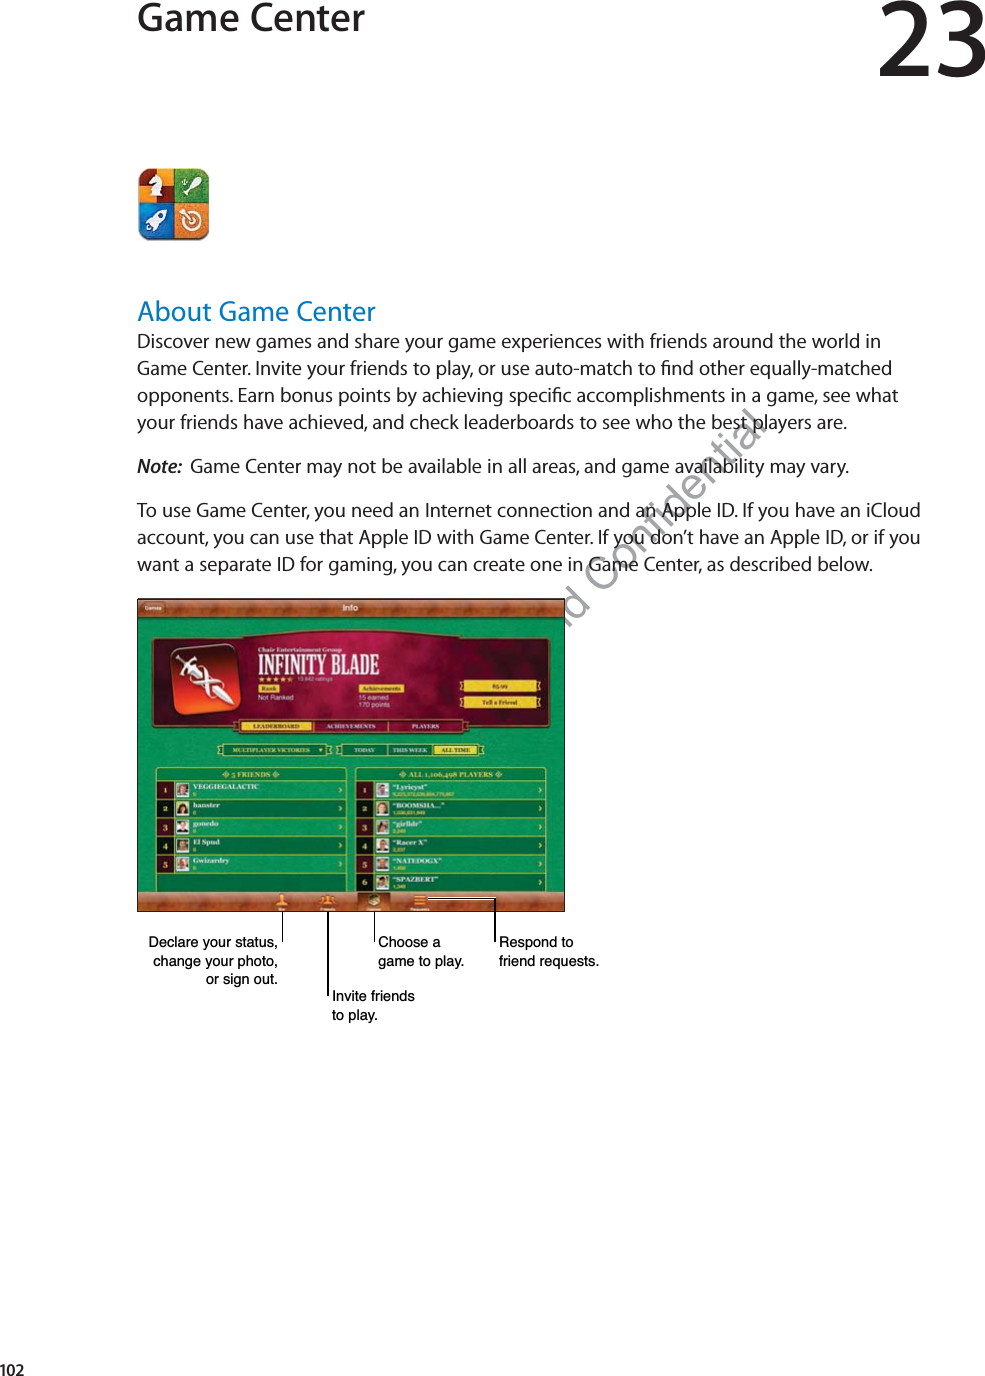 Preliminary Draft Apple Proprietary and Confidential Game Center 23About Game CenterDiscover new games and share your game experiences with friends around the world in  Game Center. Invite your friends to play, or use auto-match to ﬁnd other equally-matched opponents. Earn bonus points by achieving speciﬁc accomplishments in a game, see what  your friends have achieved, and check leaderboards to see who the best players are.Note:  Game Center may not be available in all areas, and game availability may vary.To use Game Center, you need an Internet connection and an Apple ID. If you have an iCloud account, you can use that Apple ID with Game Center. If you don’t have an Apple ID, or if you  want a separate ID for gaming, you can create one in Game Center, as described below.&apos;HFODUH\RXUVWDWXVFKDQJH\RXUSKRWRRUVLJQRXW,QYLWHIULHQGVWRSOD\&amp;KRRVHDJDPHWRSOD\5HVSRQGWRIULHQGUHTXHVWV102